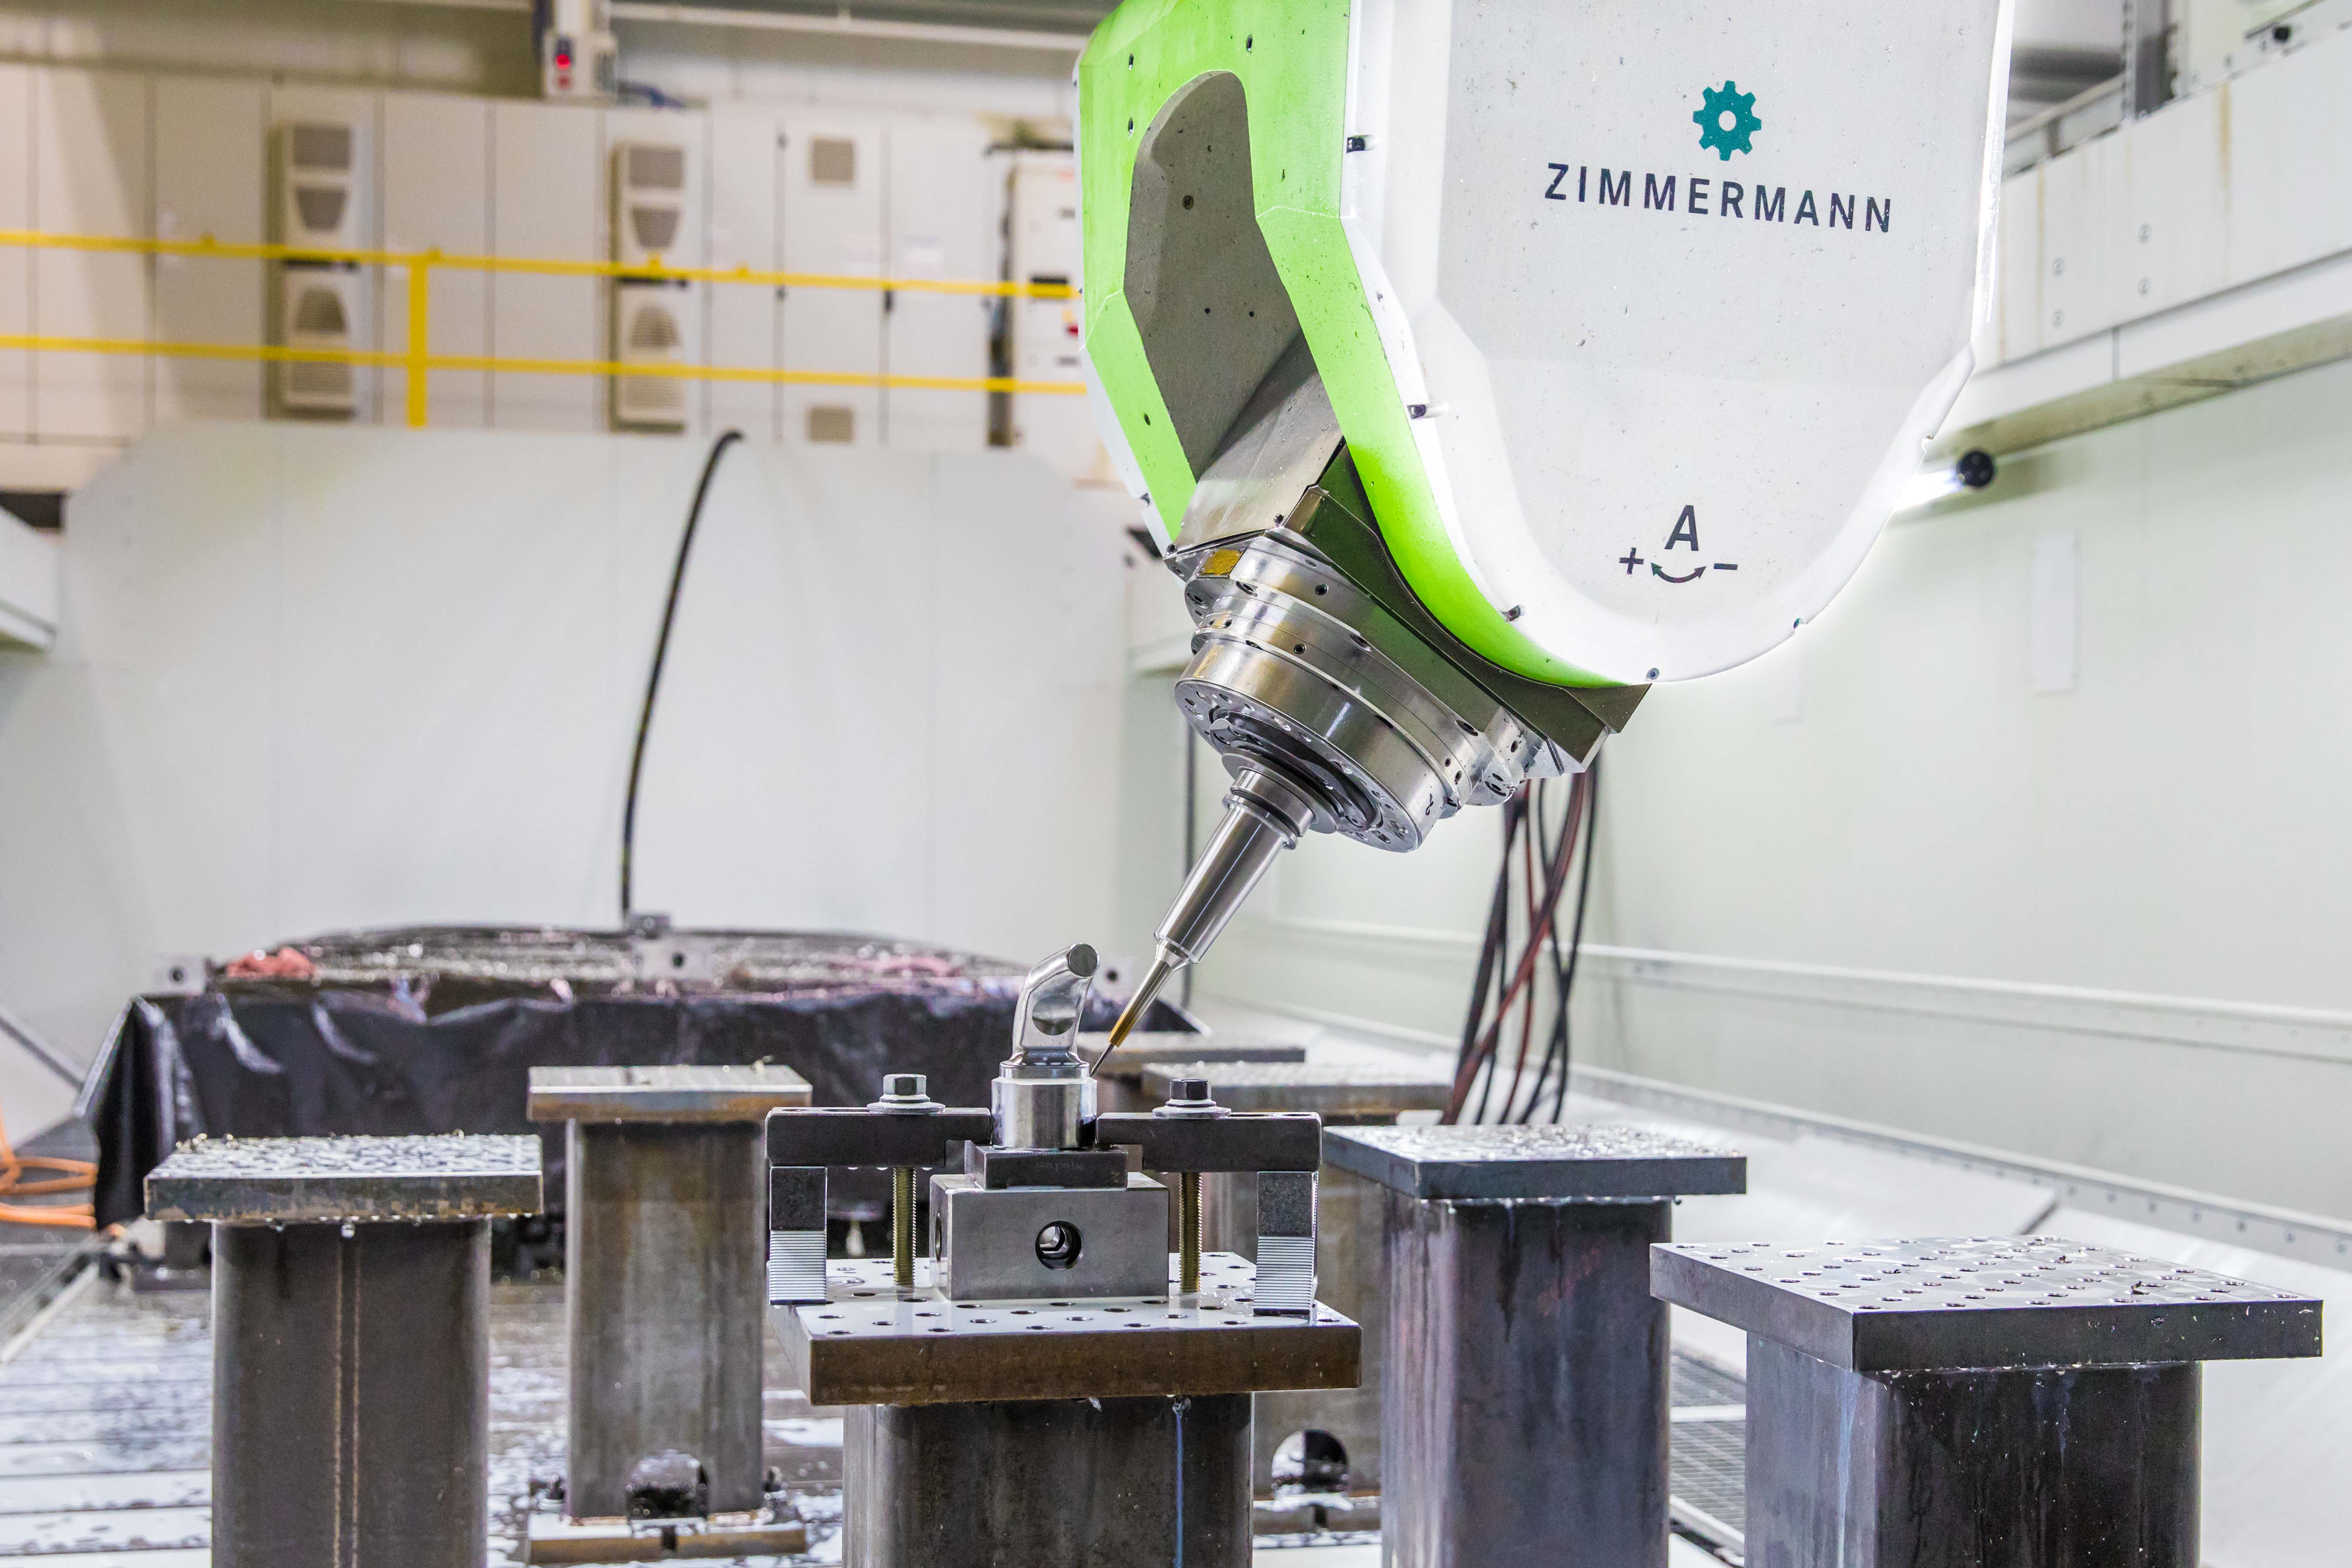 Canadian Shop Tracks Growth from Zimmermann Milling Machines